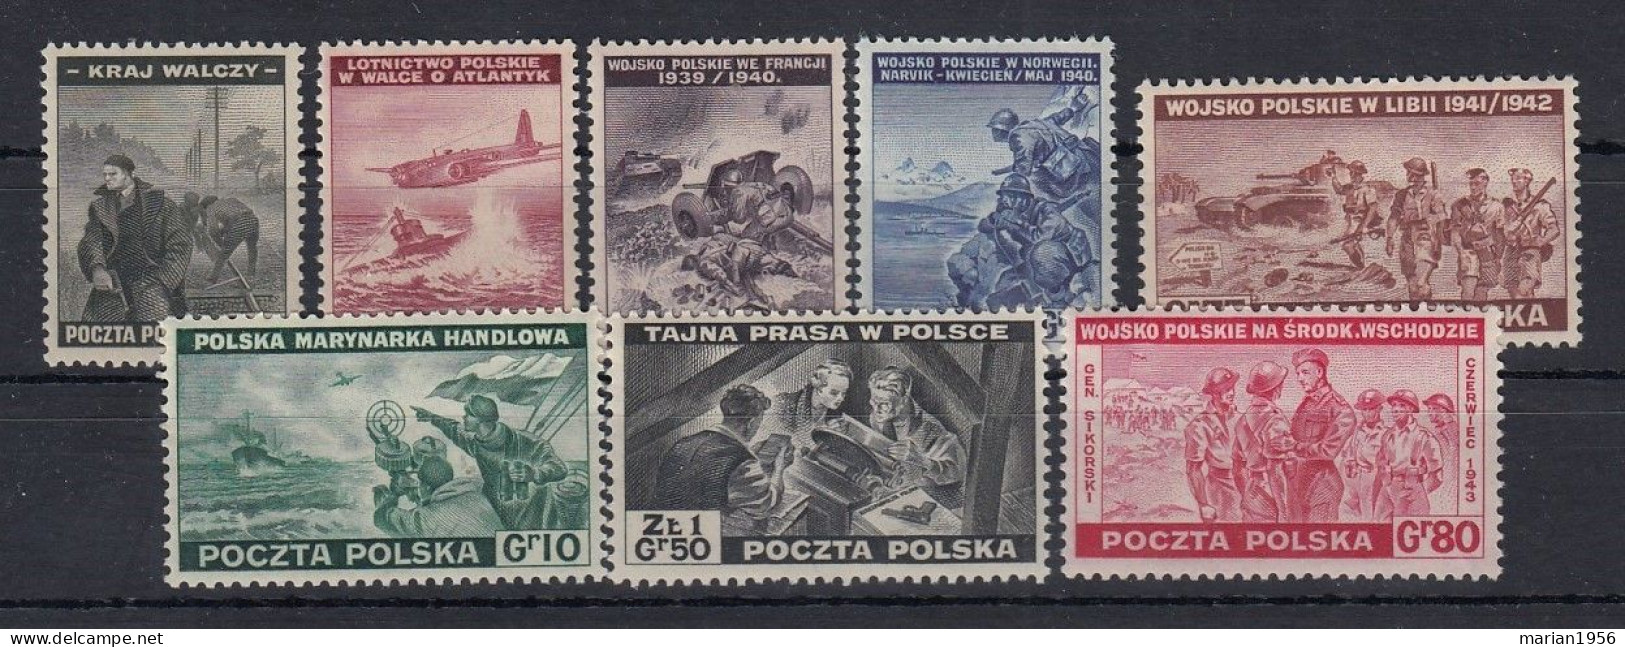 Pologne 1943 - Guerre - WWII - GOVERNMENT In EXILE (LONDON) - ARMEE POLONAISE -Mich. 368/75 - MNH - Regering In Londen(Ballingschap)